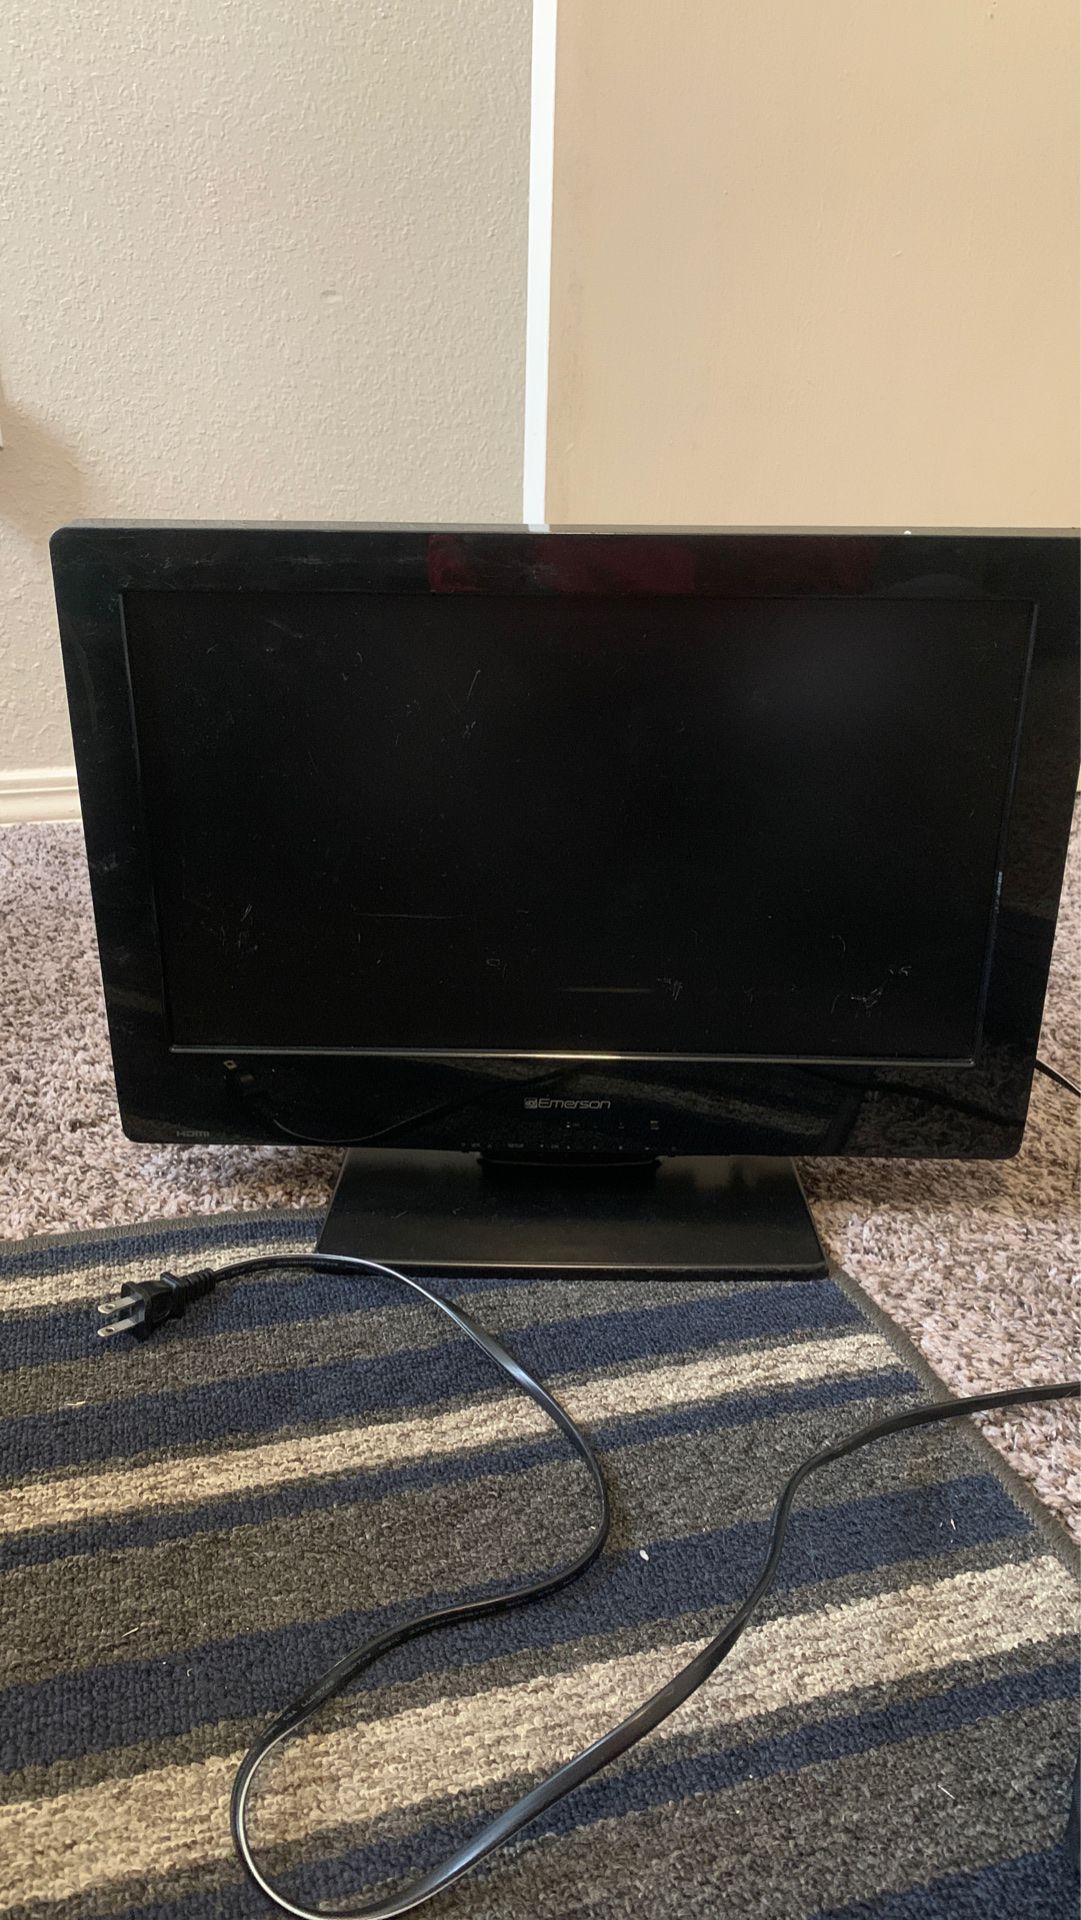 Emerson 18 inch flat screen with DVD build in